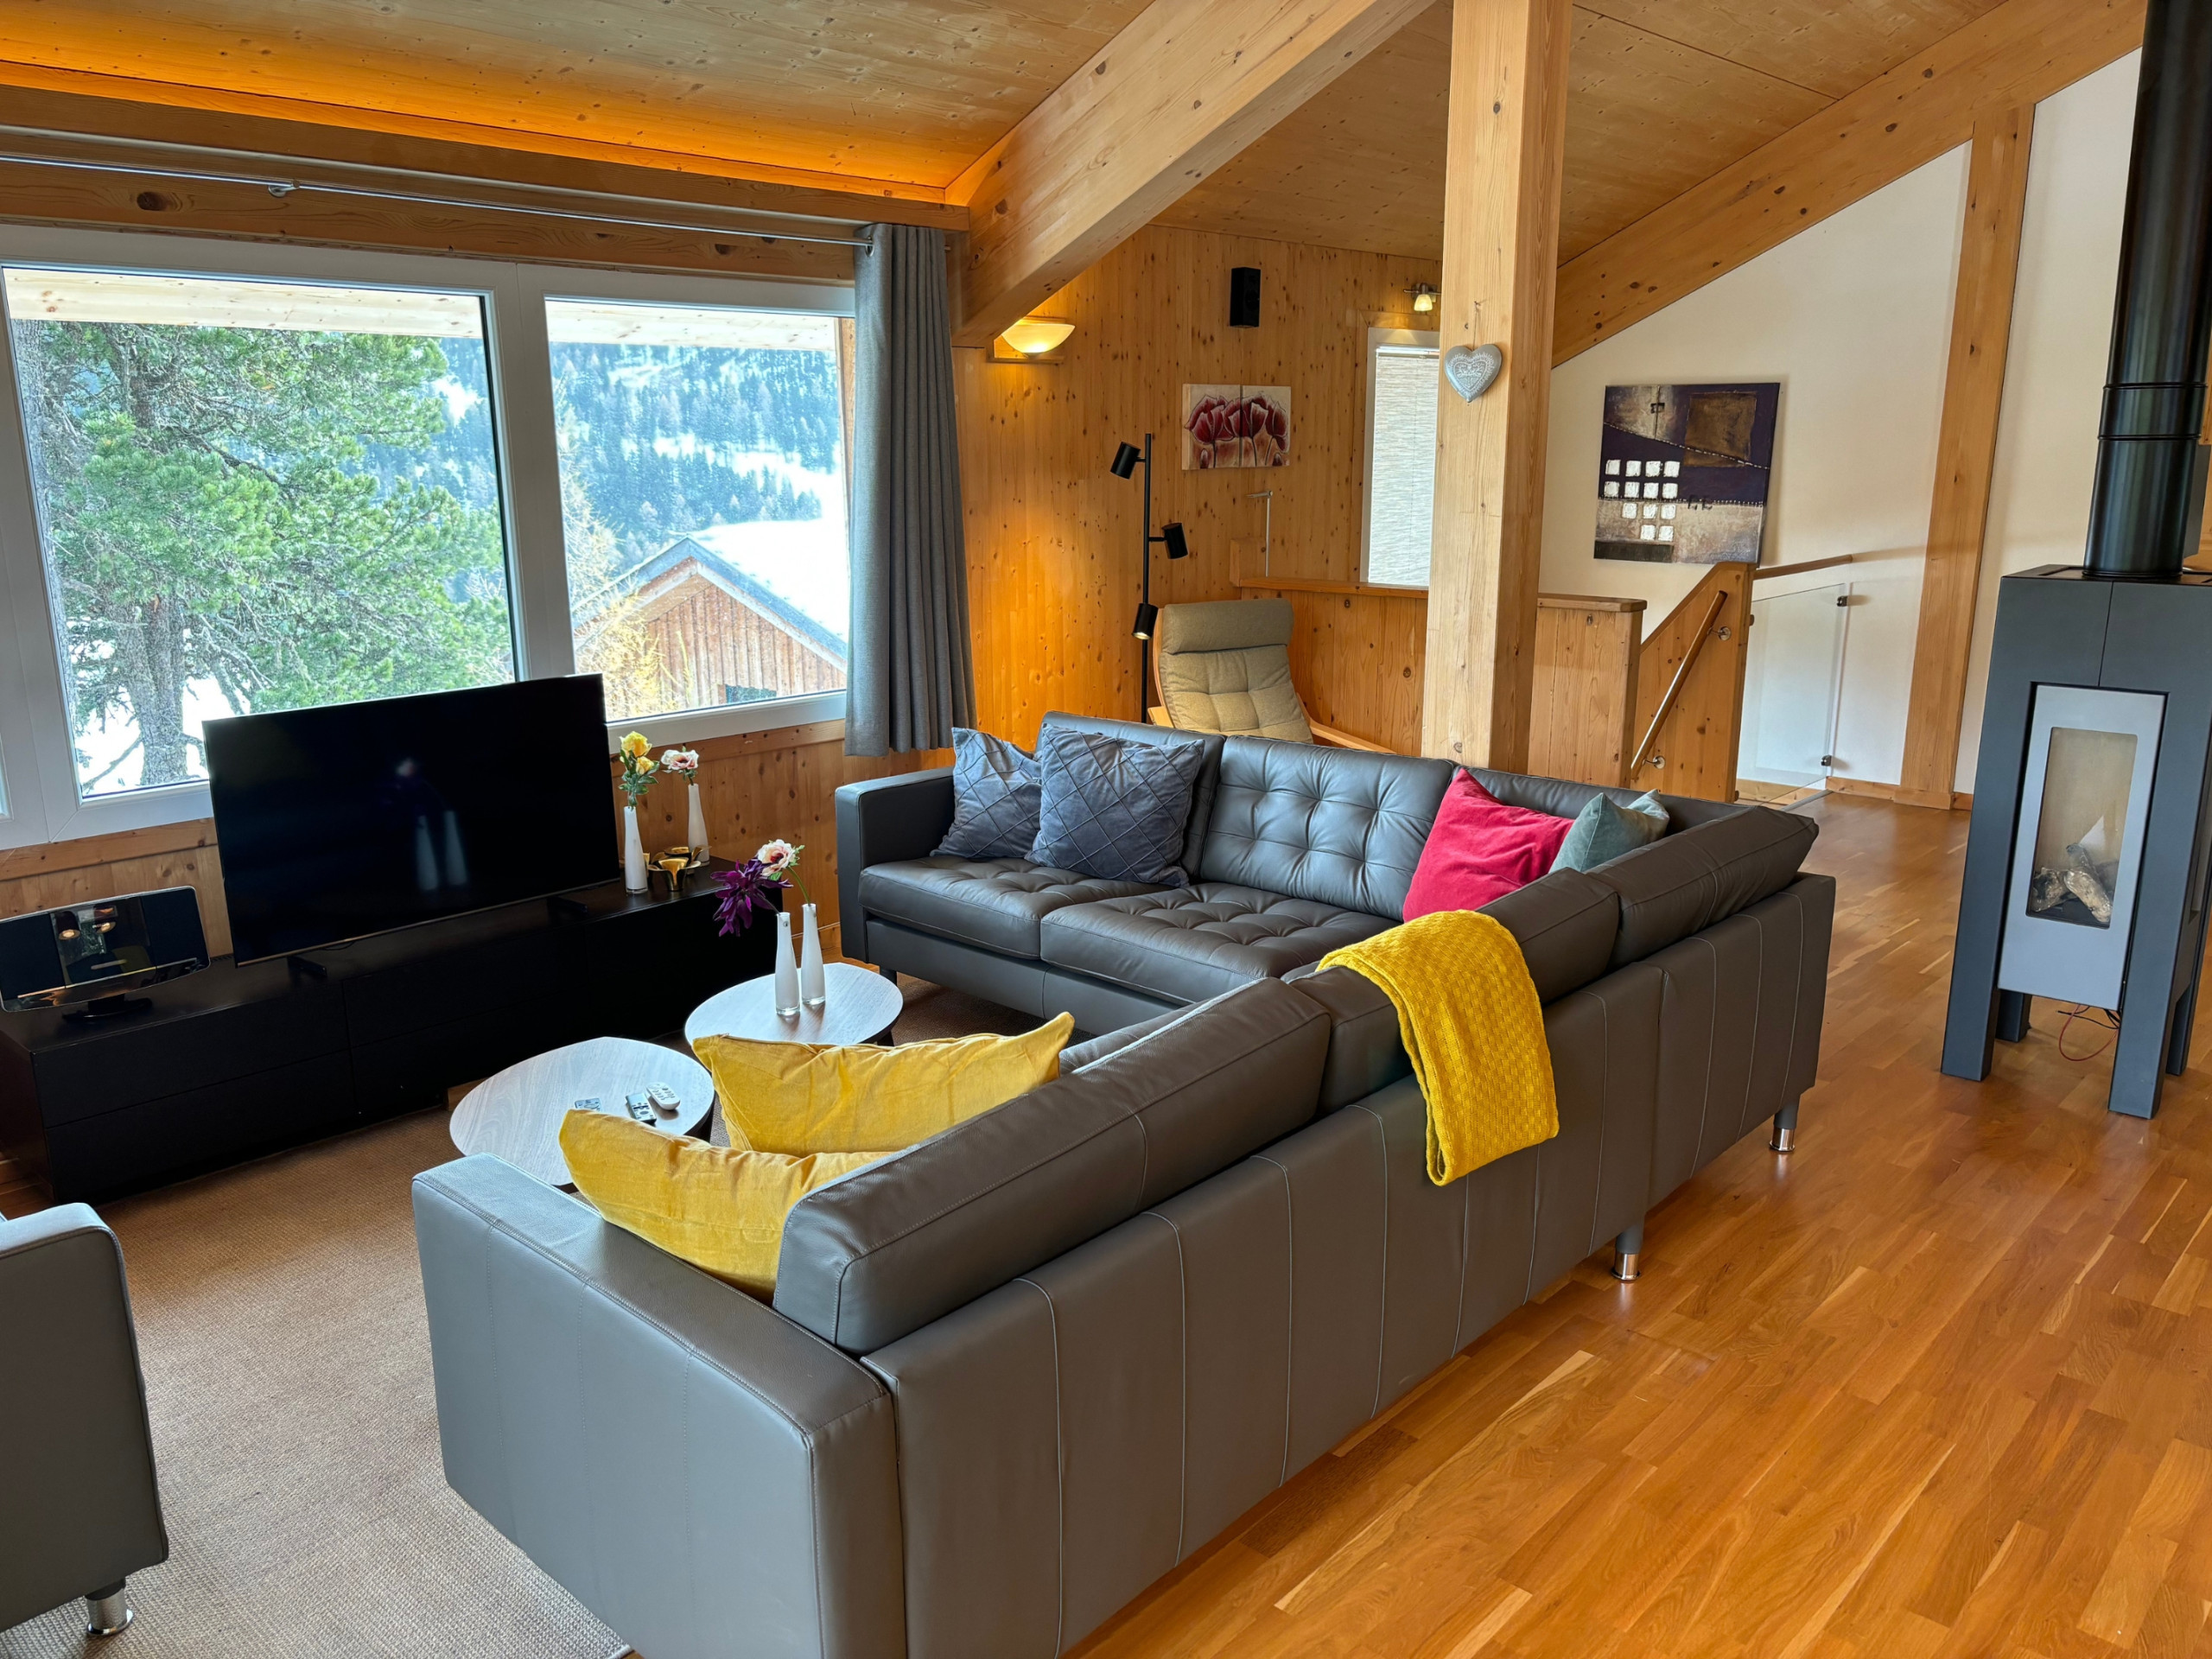  in Turrach - Chalet # 41 with sauna and indoor whirlpool